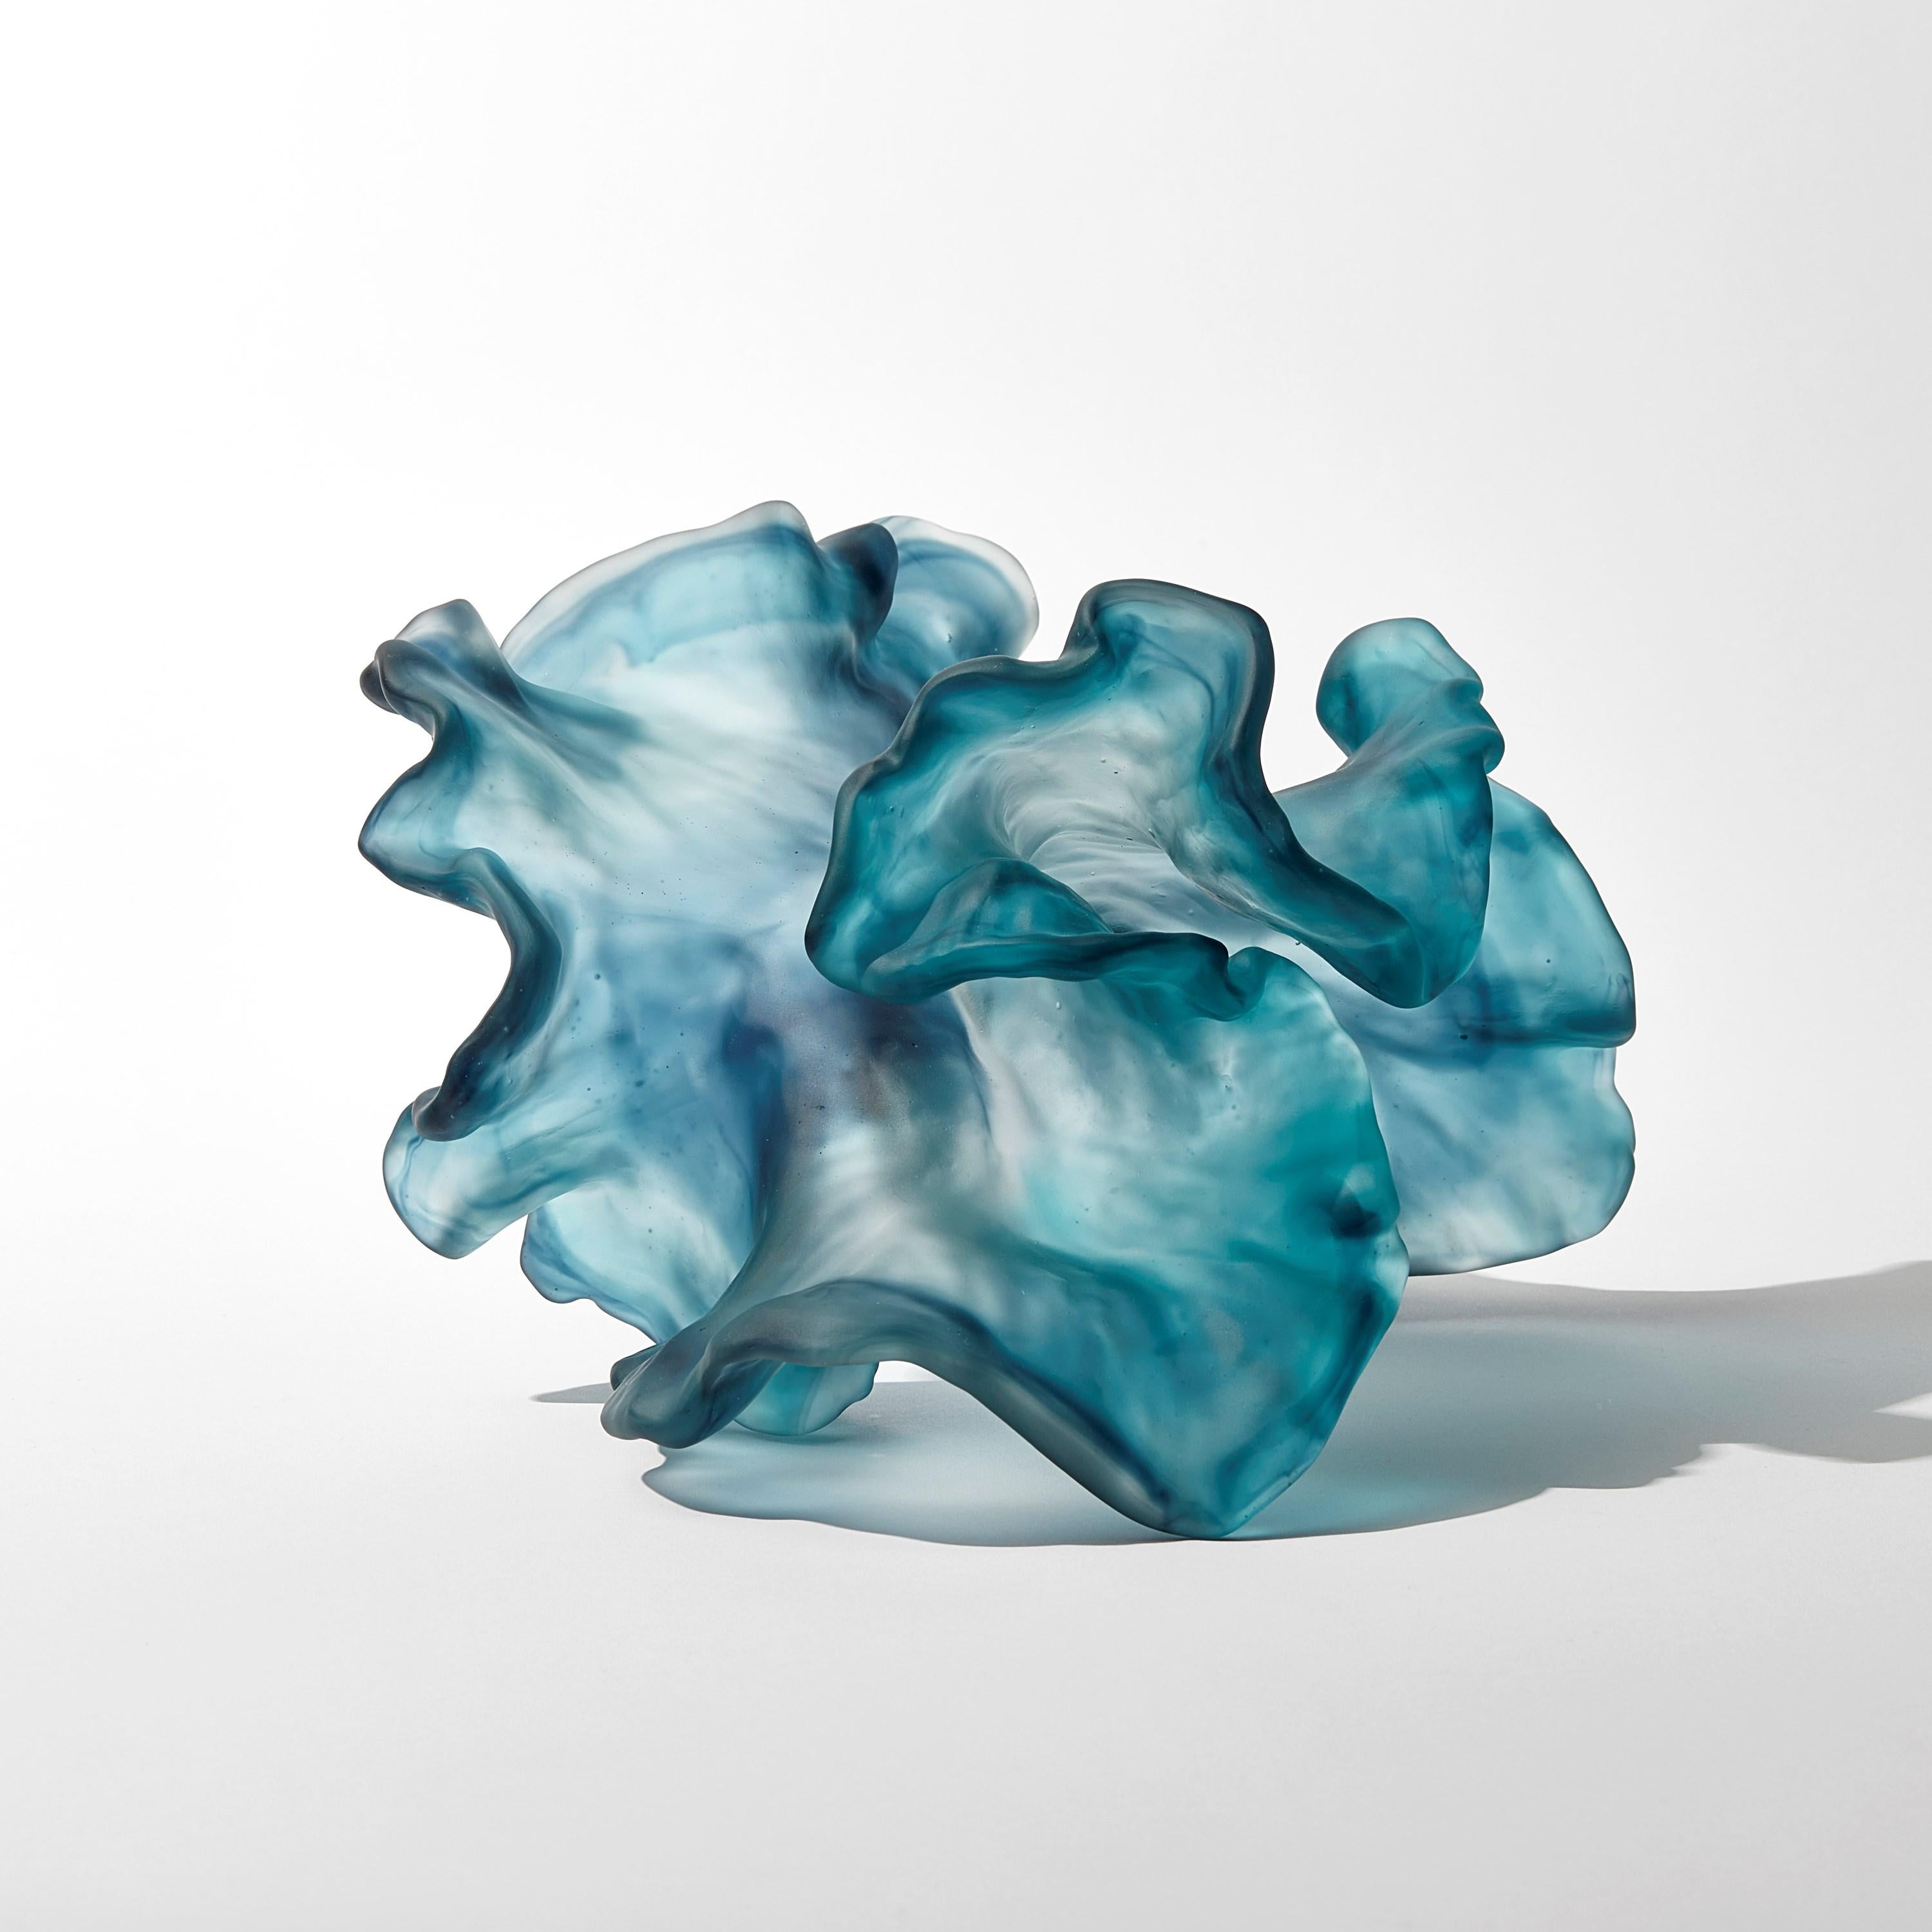 Hand-Crafted Floating Twist, teal blue cast glass ethereal organic artwork by Monette Larsen For Sale